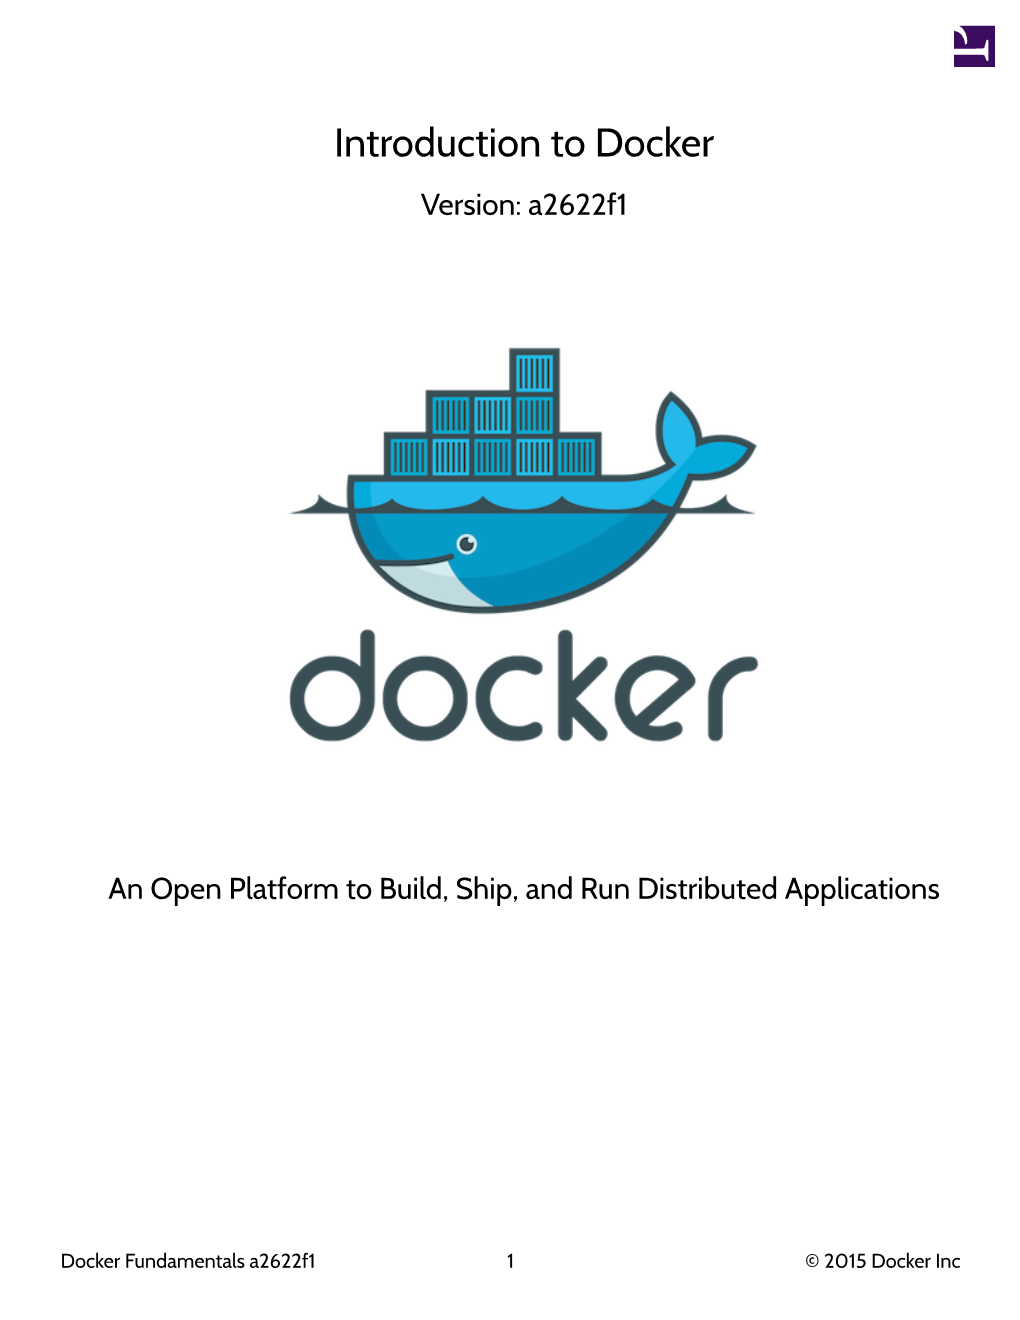 Introduction to Docker Version: A2622f1